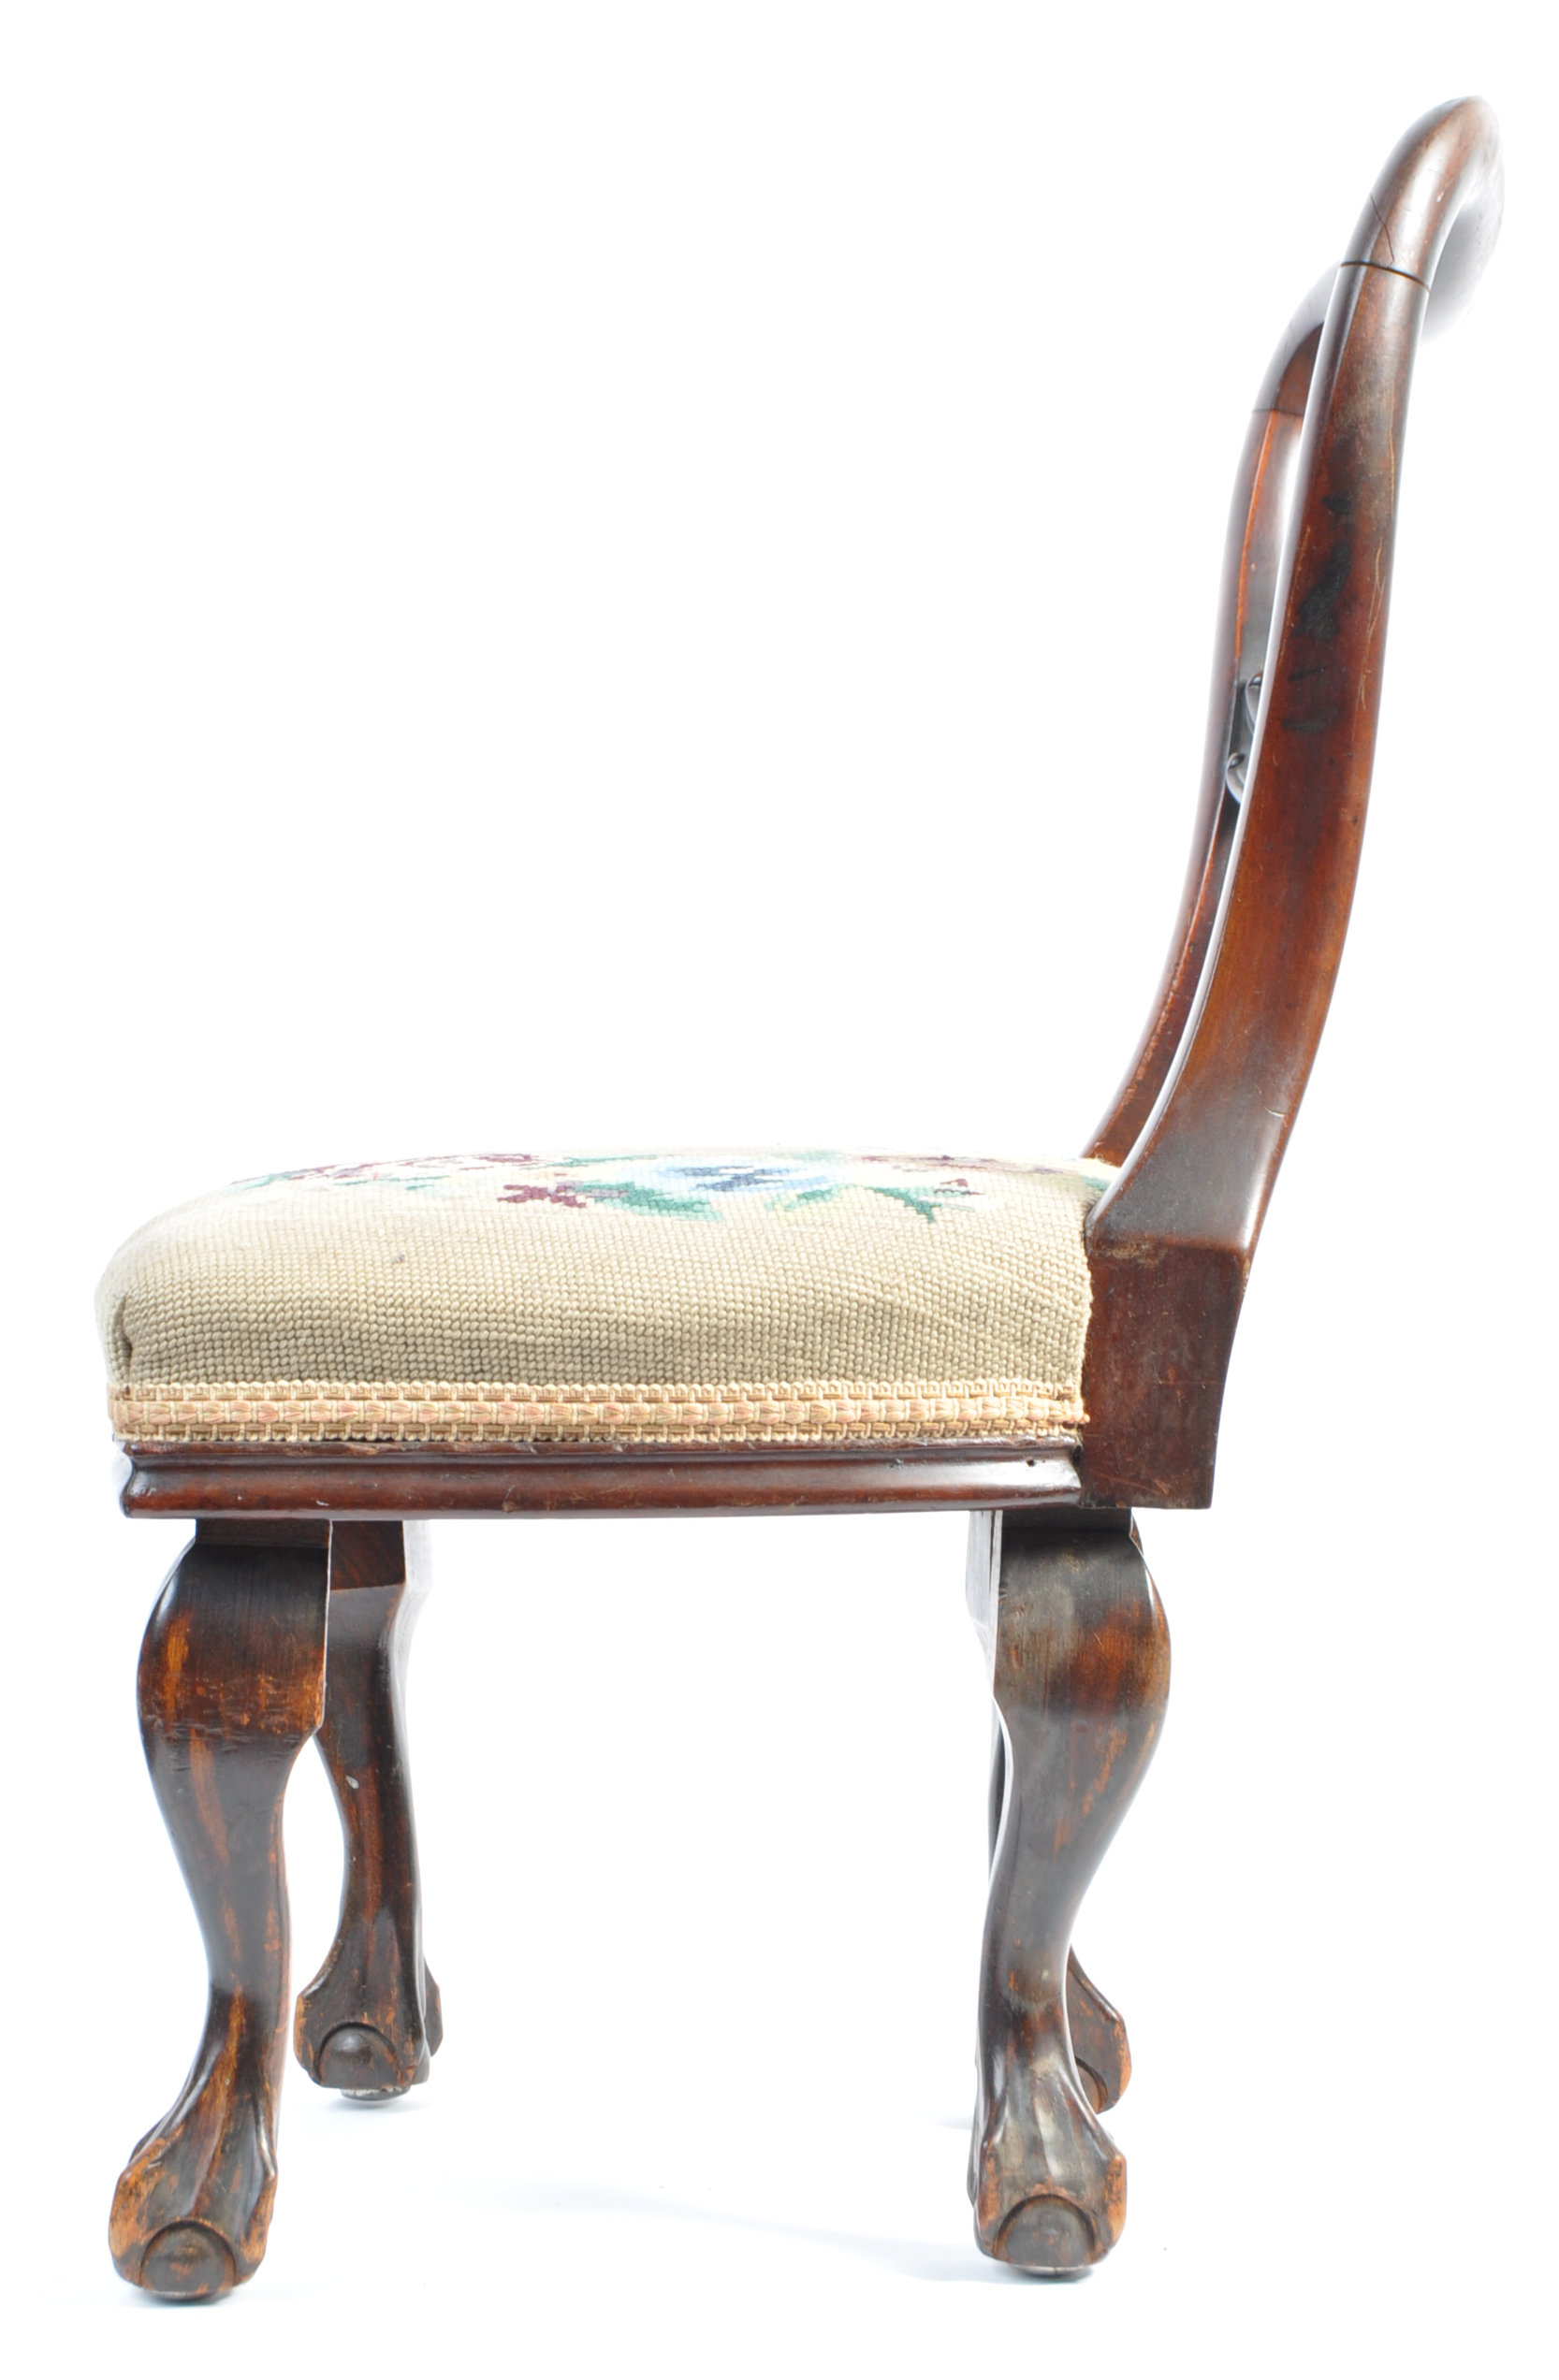 19TH CENTURY VICTORIAN MAHOGANY CHILDS CHAIR - Image 13 of 16